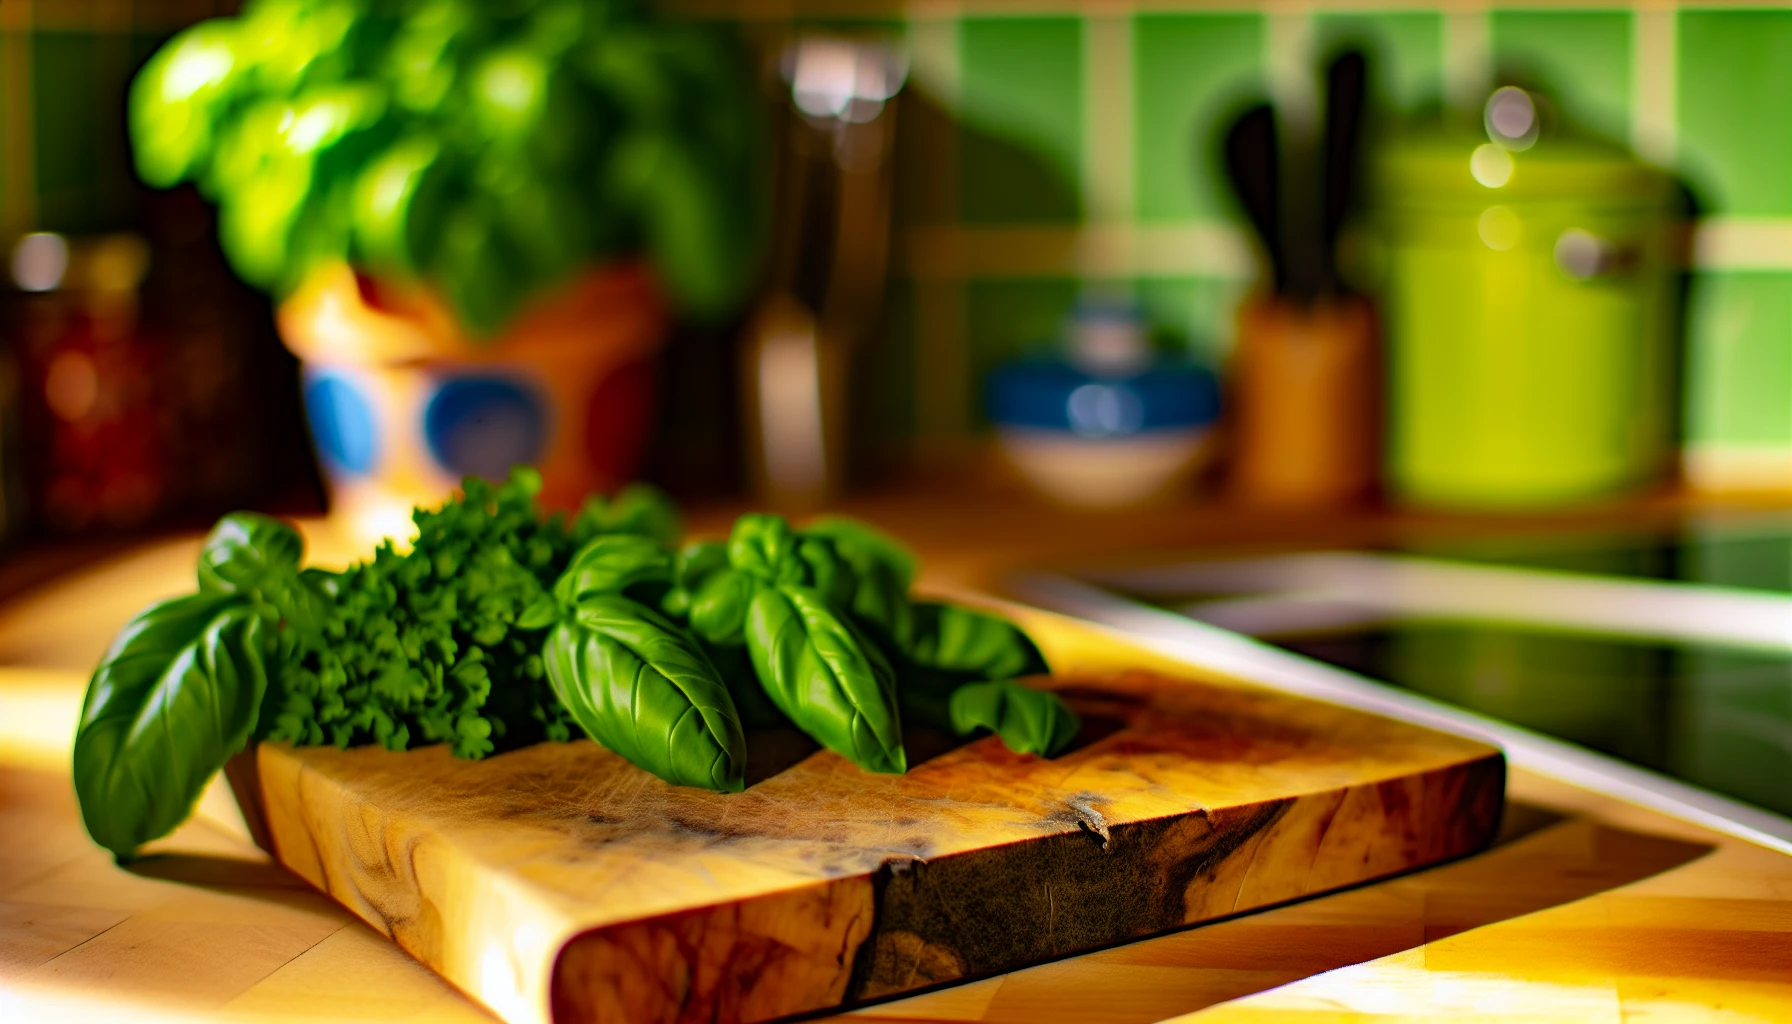 Fresh basil and parsley leaves in a kitchen setting